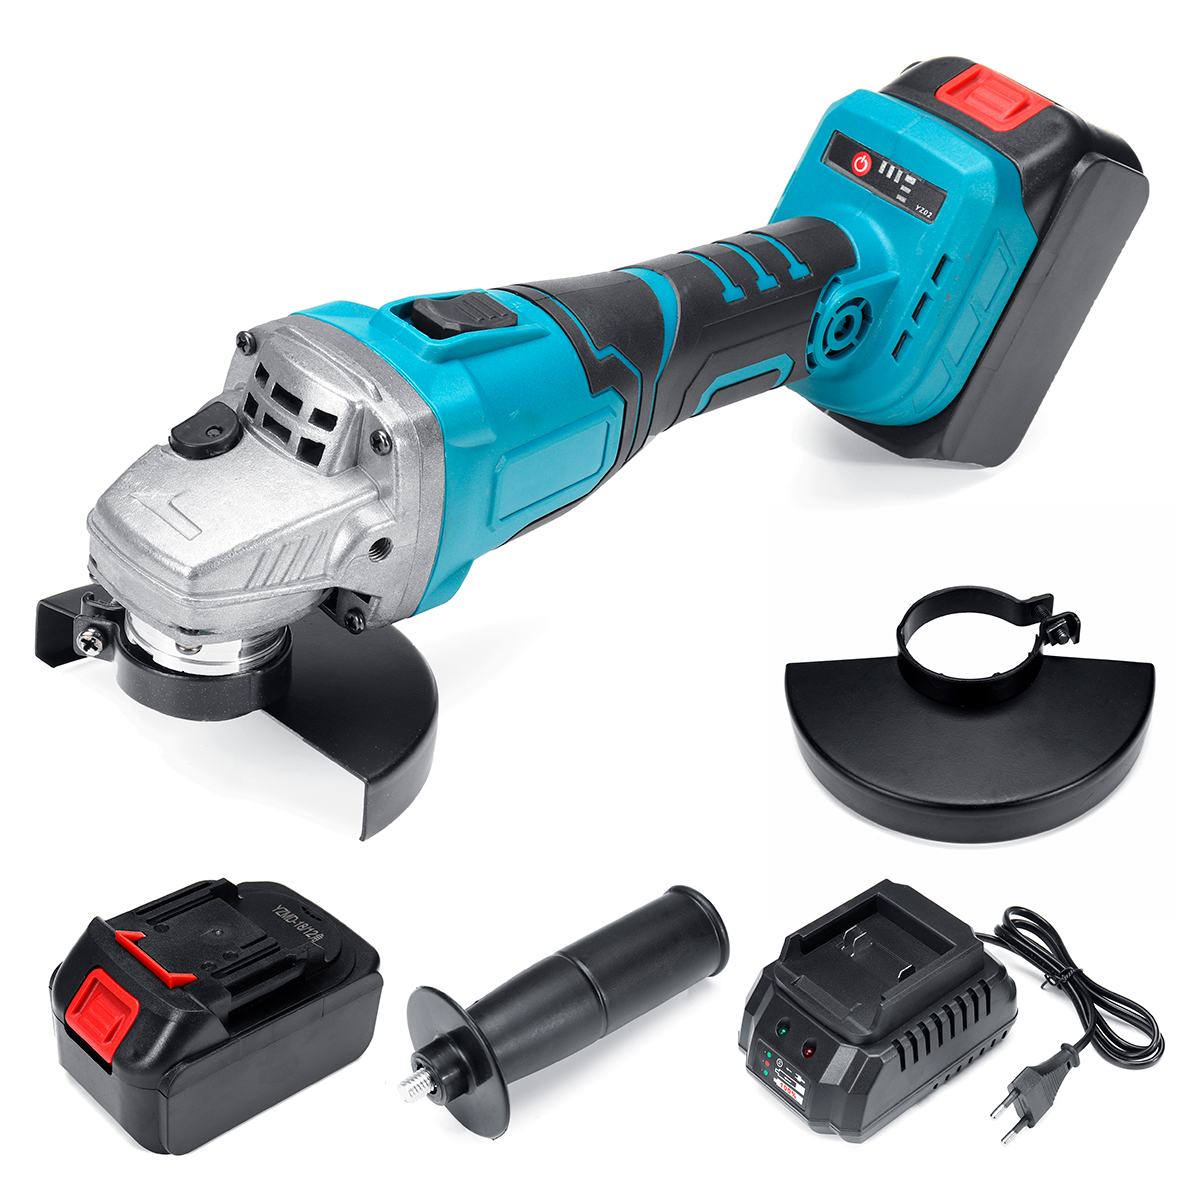 40V-128TV-29800mA-Electric-Angle-Grinder-Cordless-Grinding-Machine-Power-Cutting-Tool-Set-1518610-5